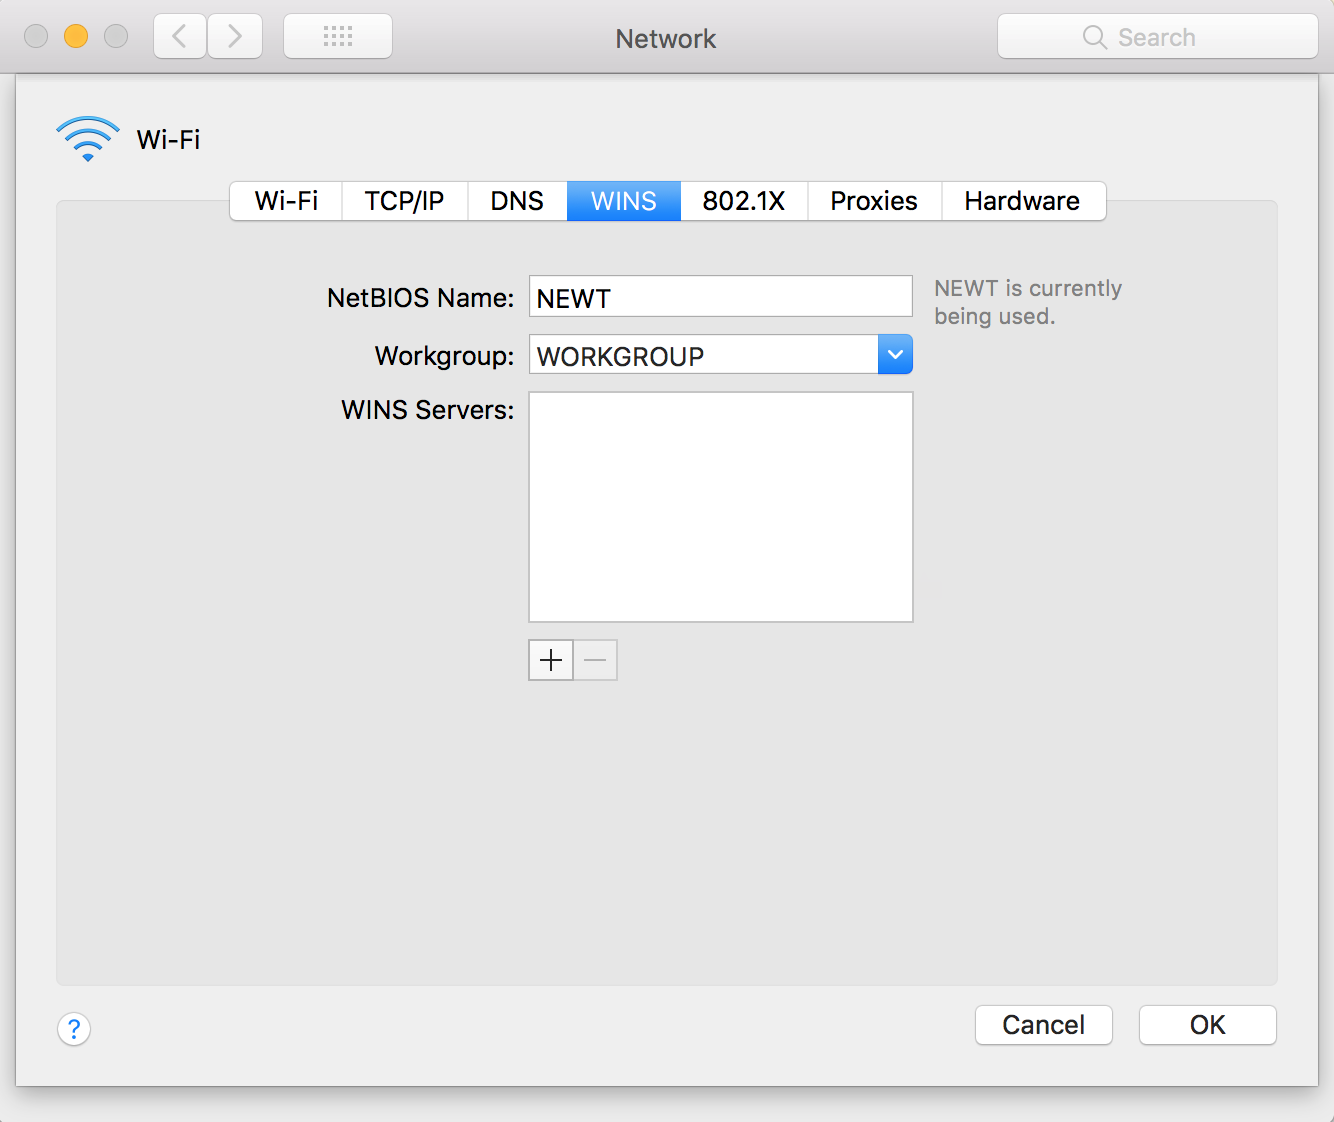 Macos Sierra Always Prompts For Credentials For Network Drives